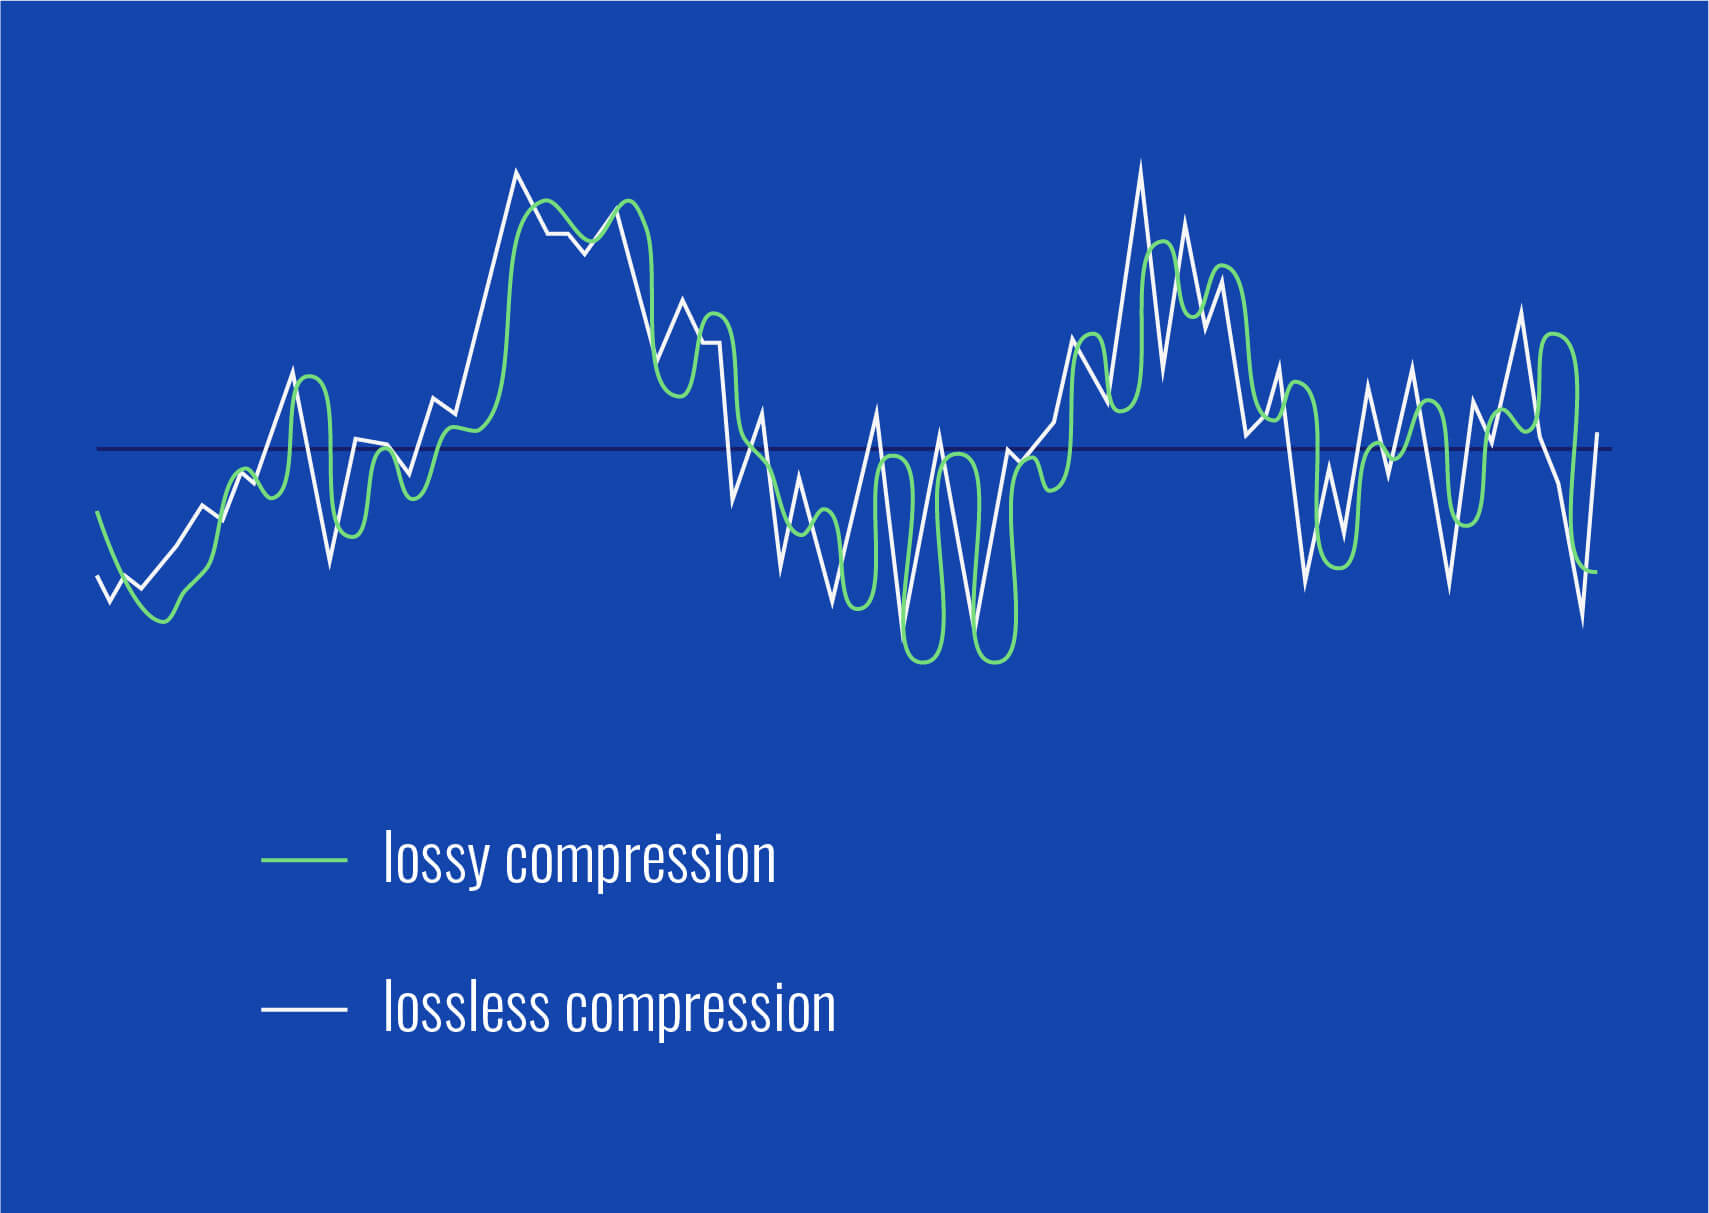 Using another part of same the audio file as we did earlier, we can see how the lossless (FLAC) reaches higher peaks than the compressed lossy (MP3) file does. 